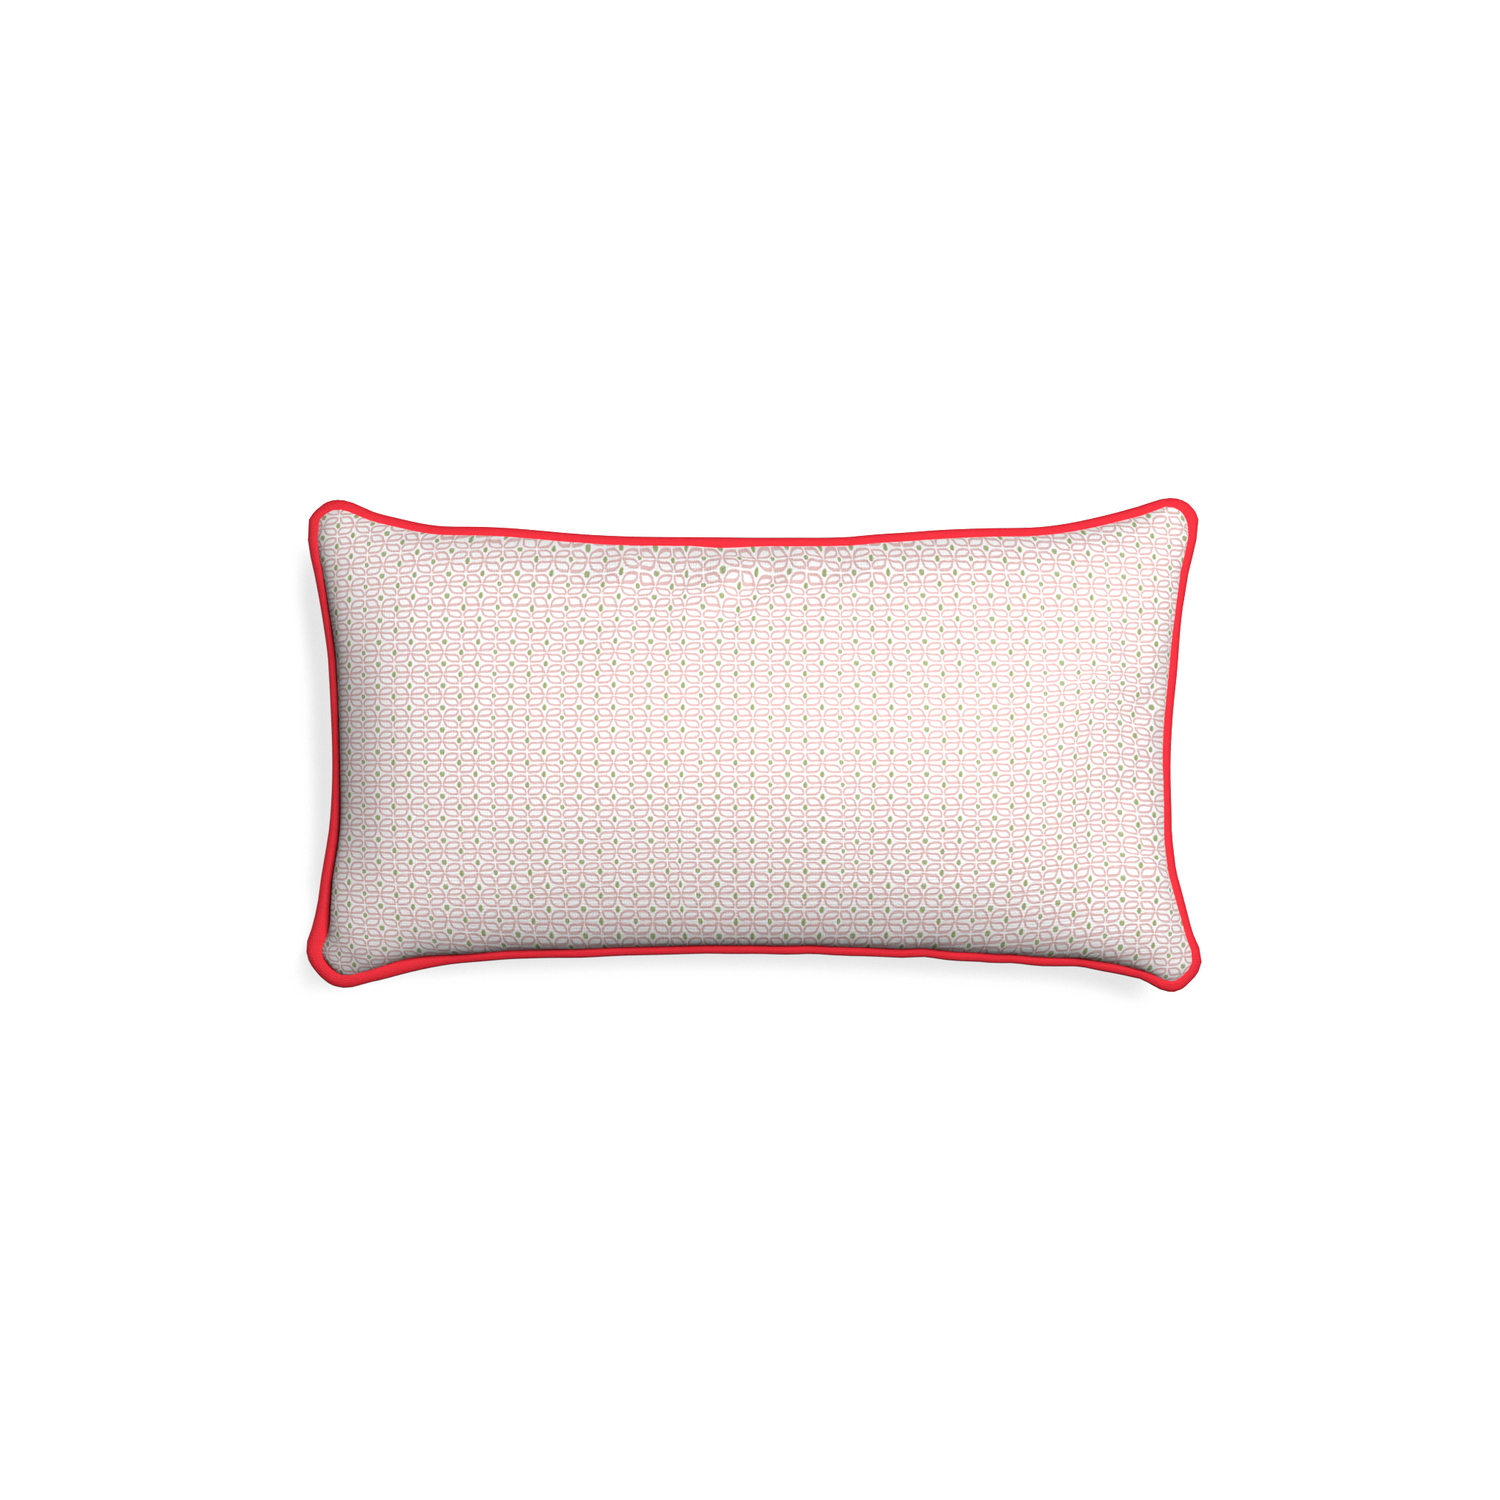 Petite-lumbar loomi pink custom pink geometricpillow with cherry piping on white background